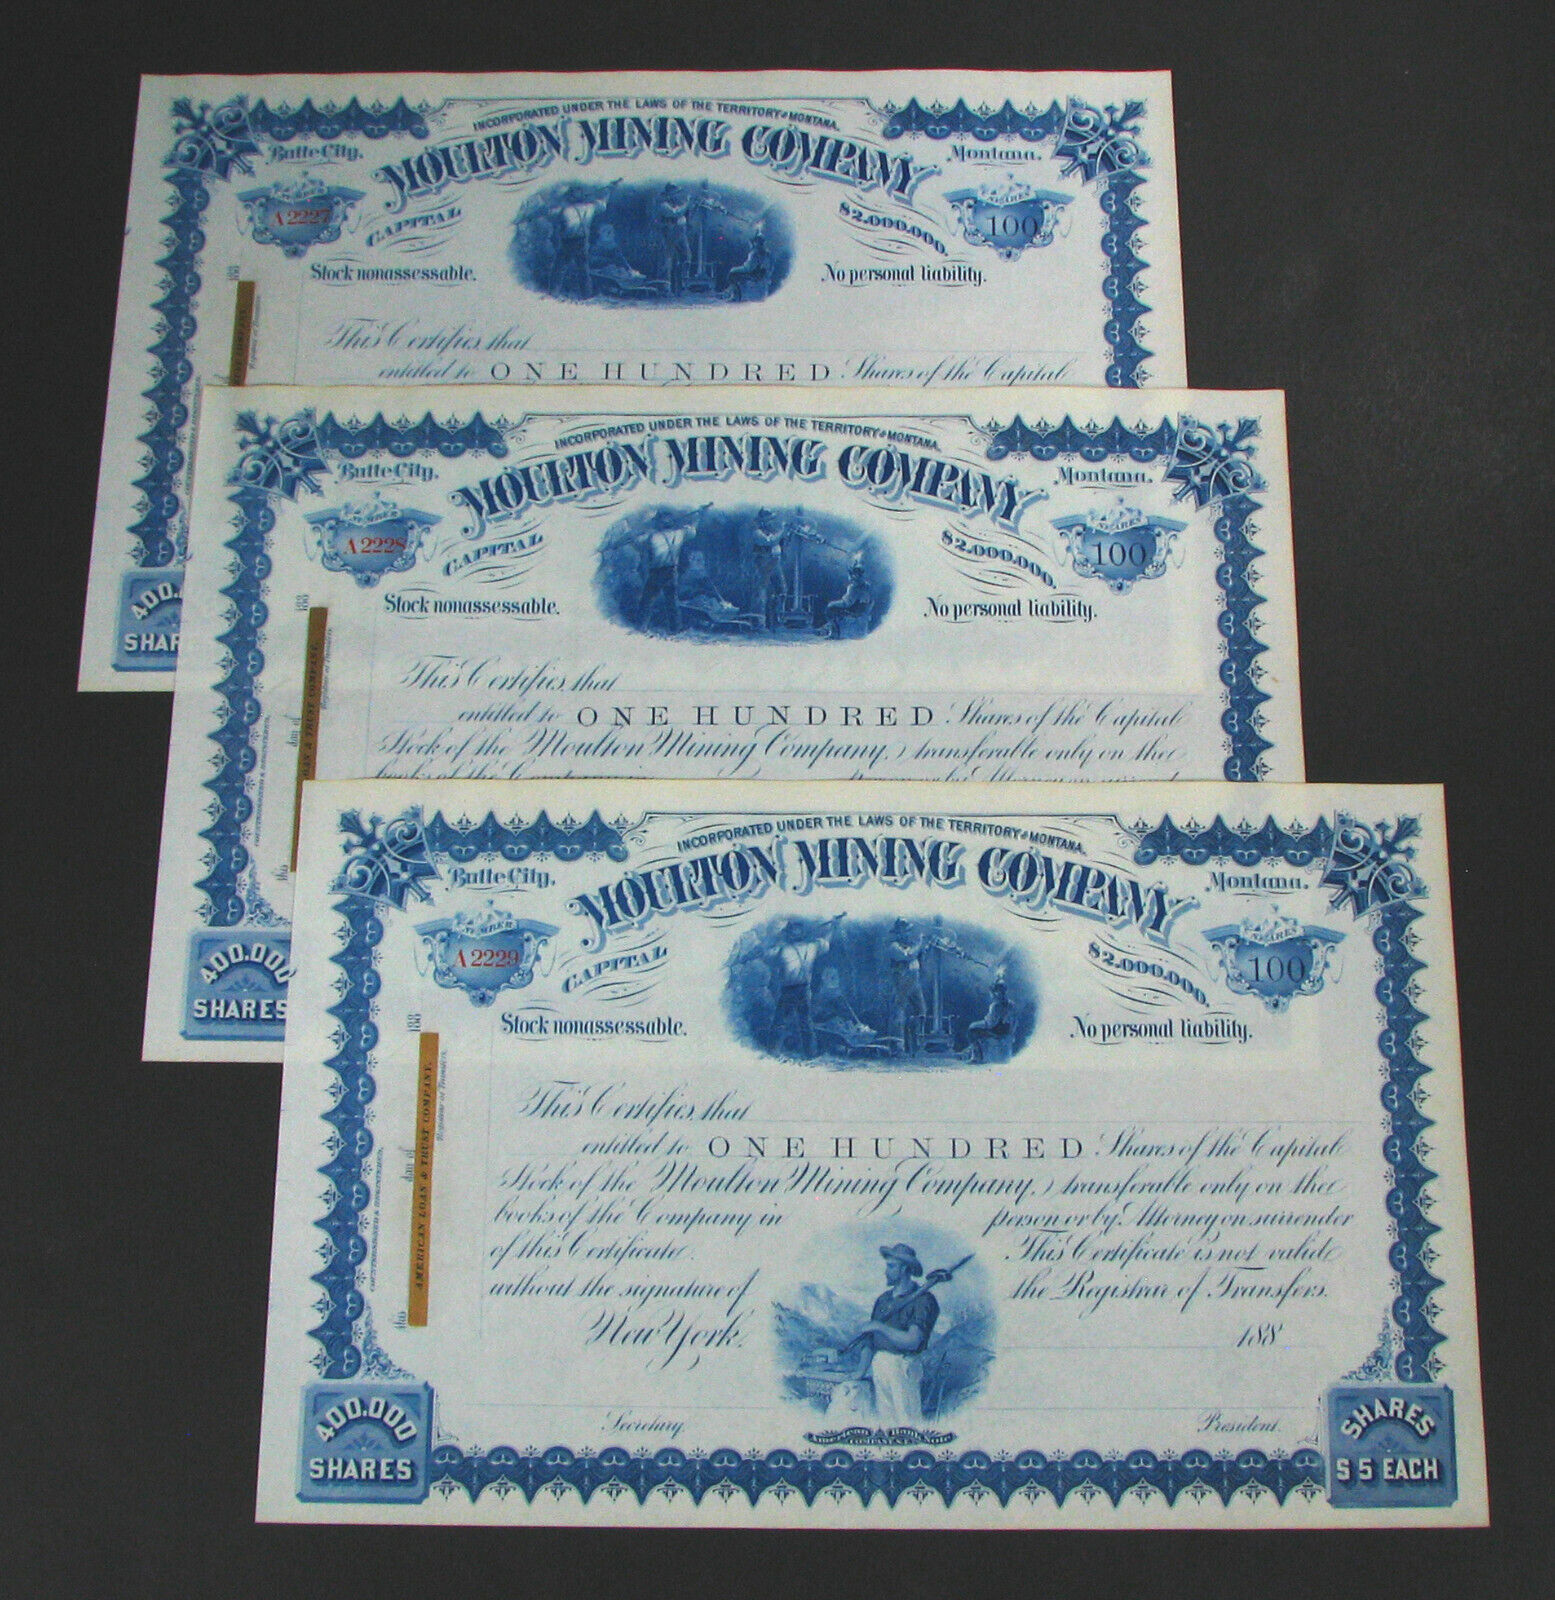 #13 - 3 old BUTTE CITY, MONTANA TERRITORY stock certificates MOULTON MINING CO.